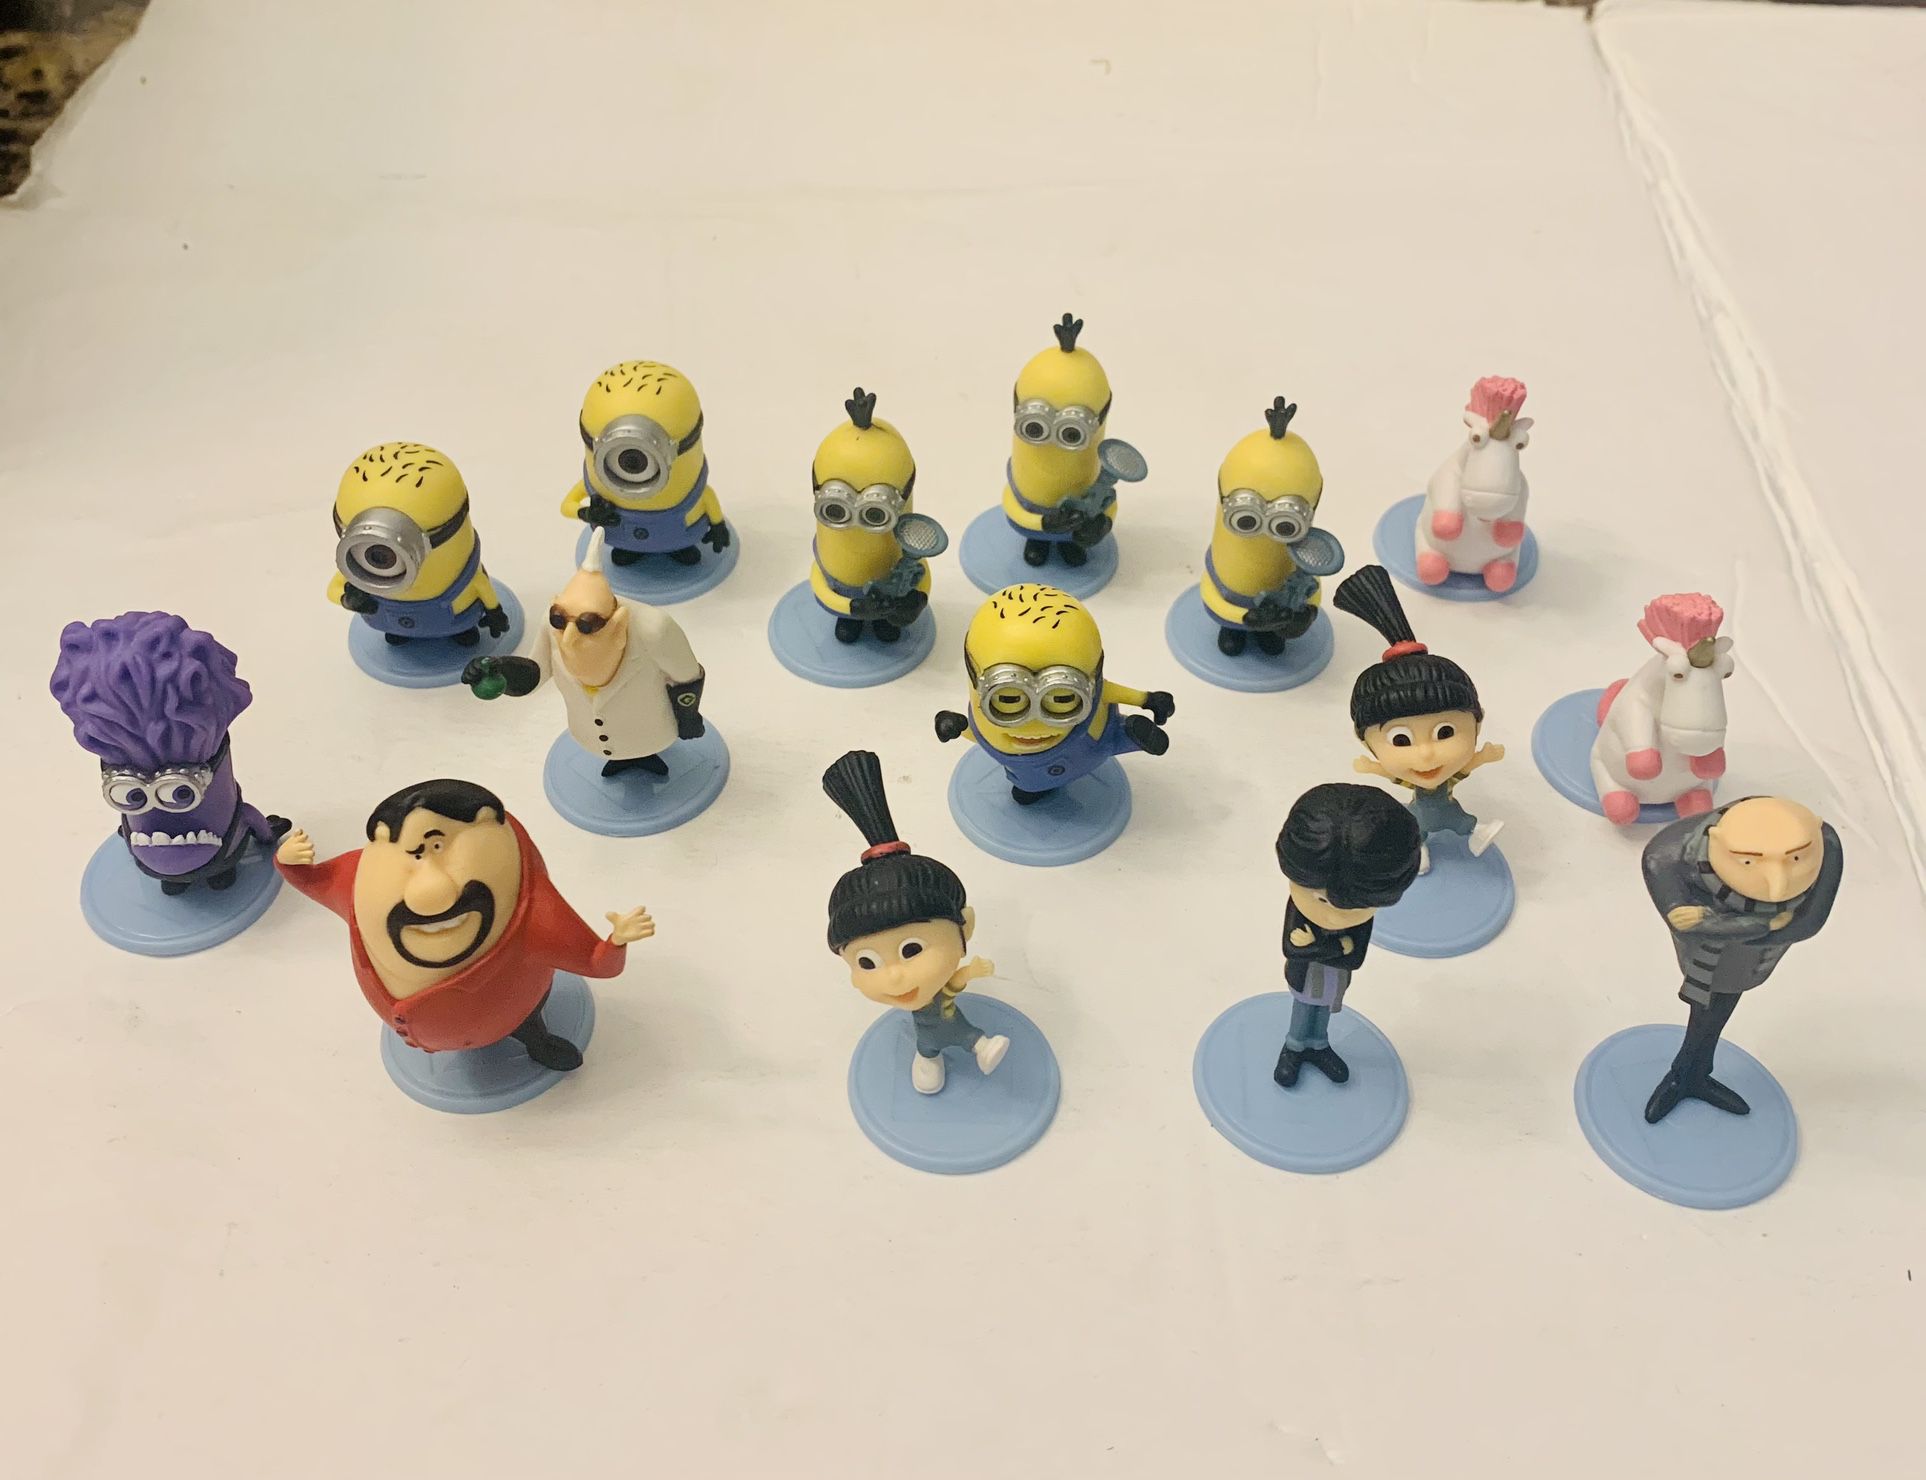 Dispicable Me 2 Thinkway Toys Minions Lot of 15 Mini Figures